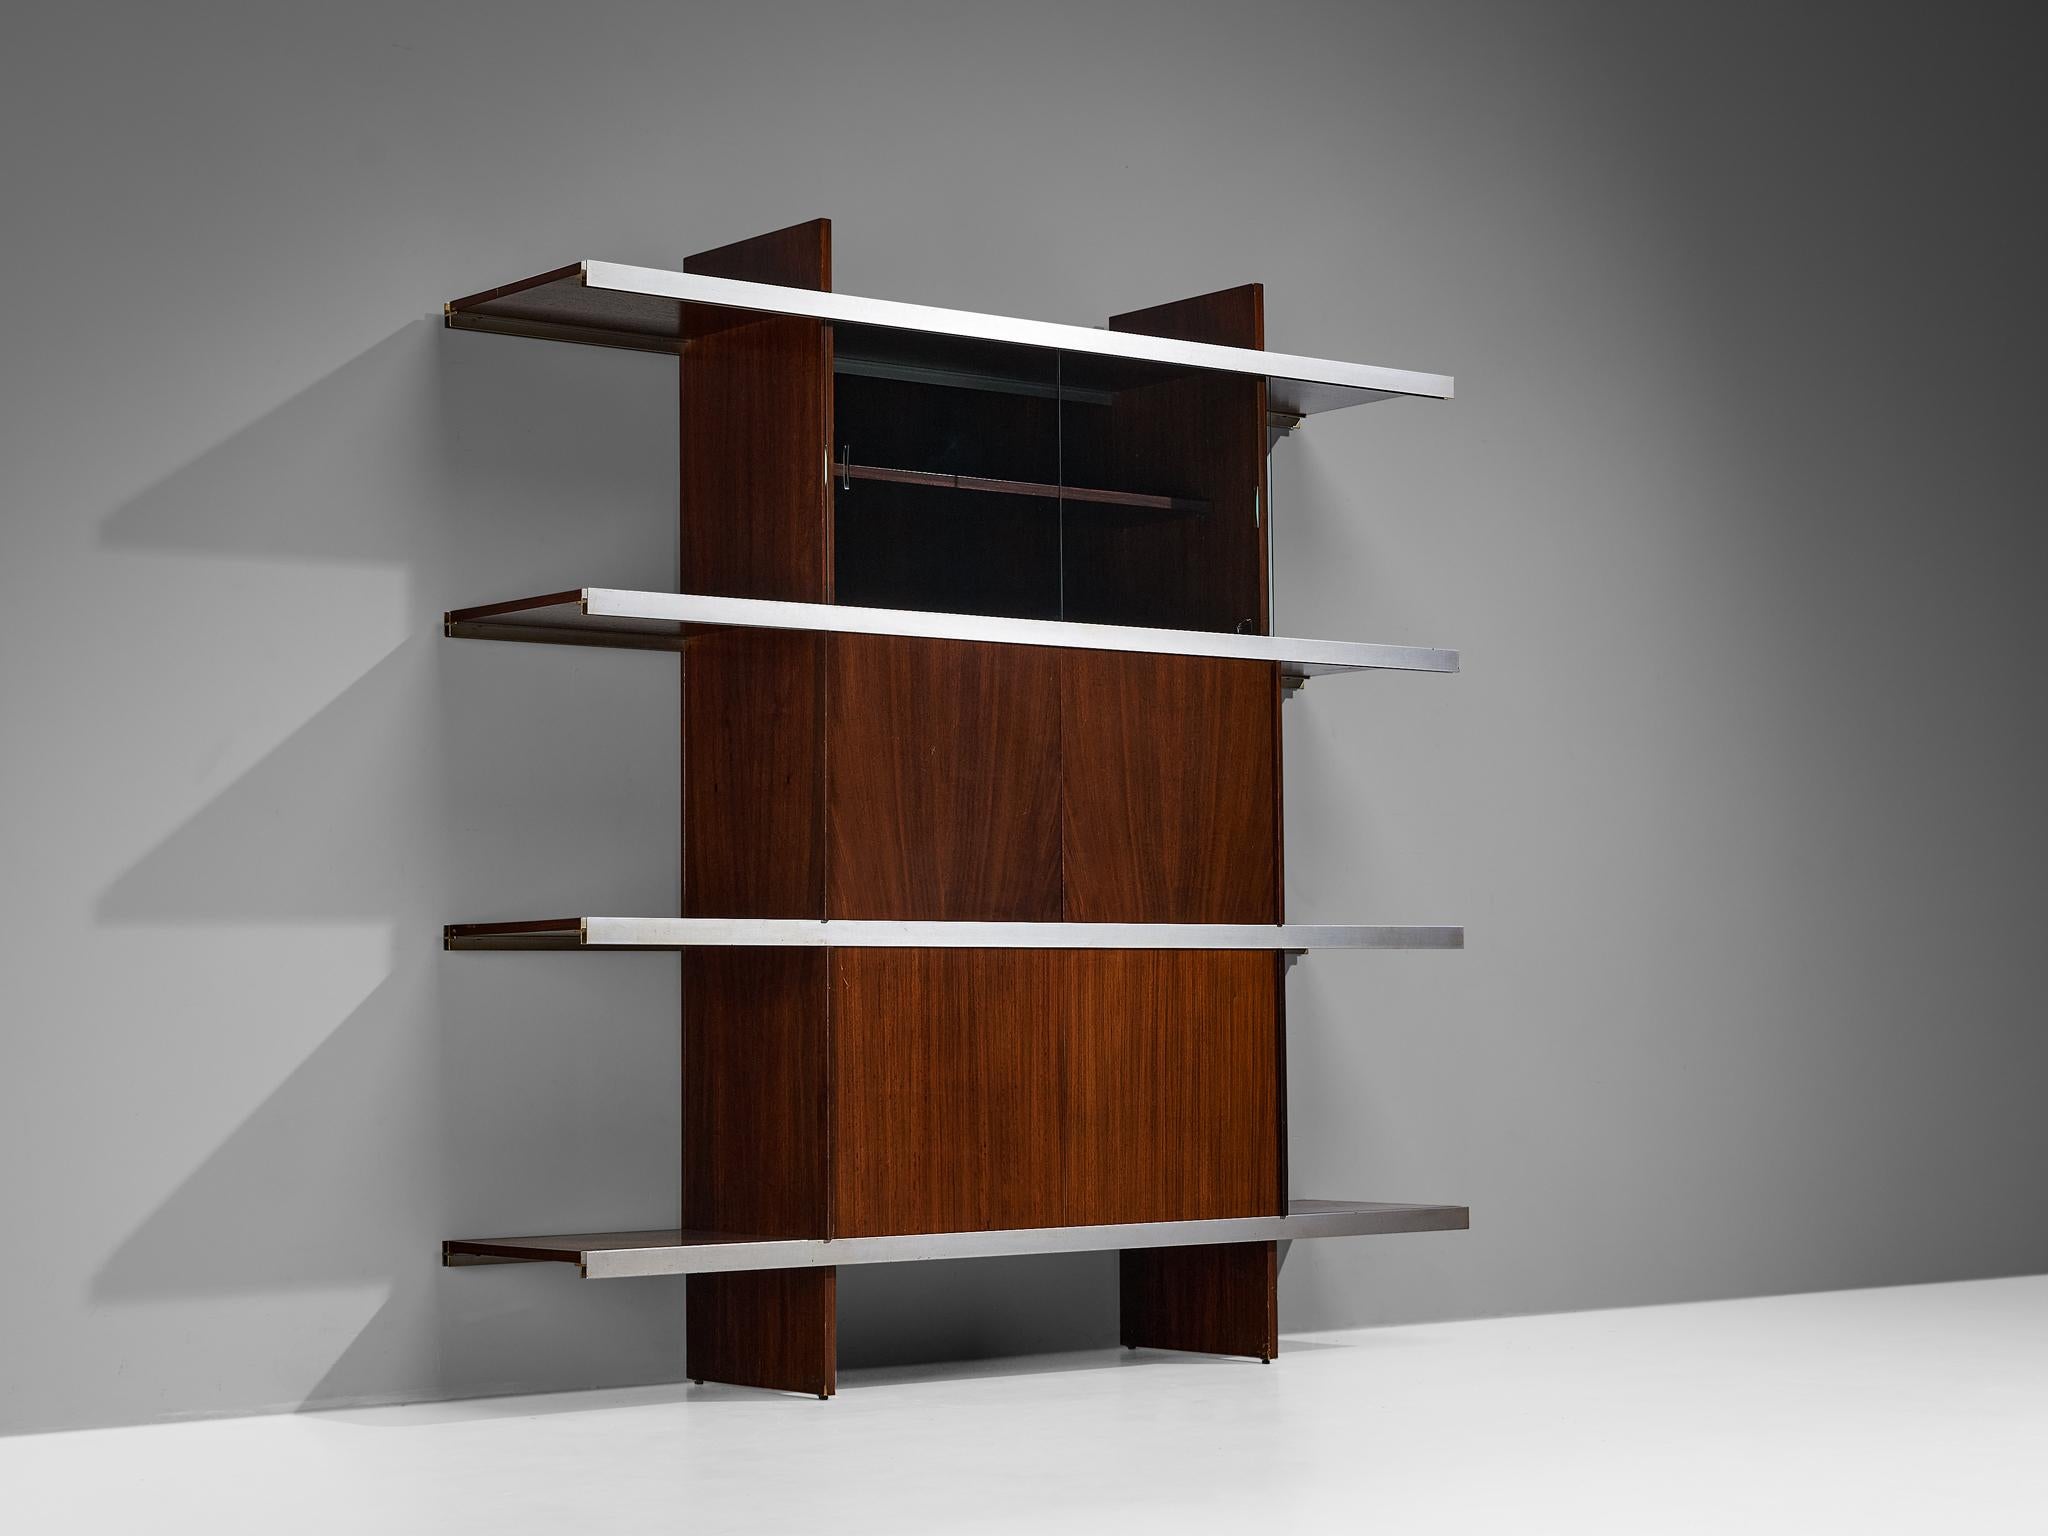 Angelo Mangiarotti for Poltronova, wall unit from 'Multiuse Series', mahogany, aluminum, Italy, 1965

Beautiful bookcase or cabinet part of the 'Multiuse Series' that Mangiarotti designed for Poltronova in 1965. Known for his designs with marble,